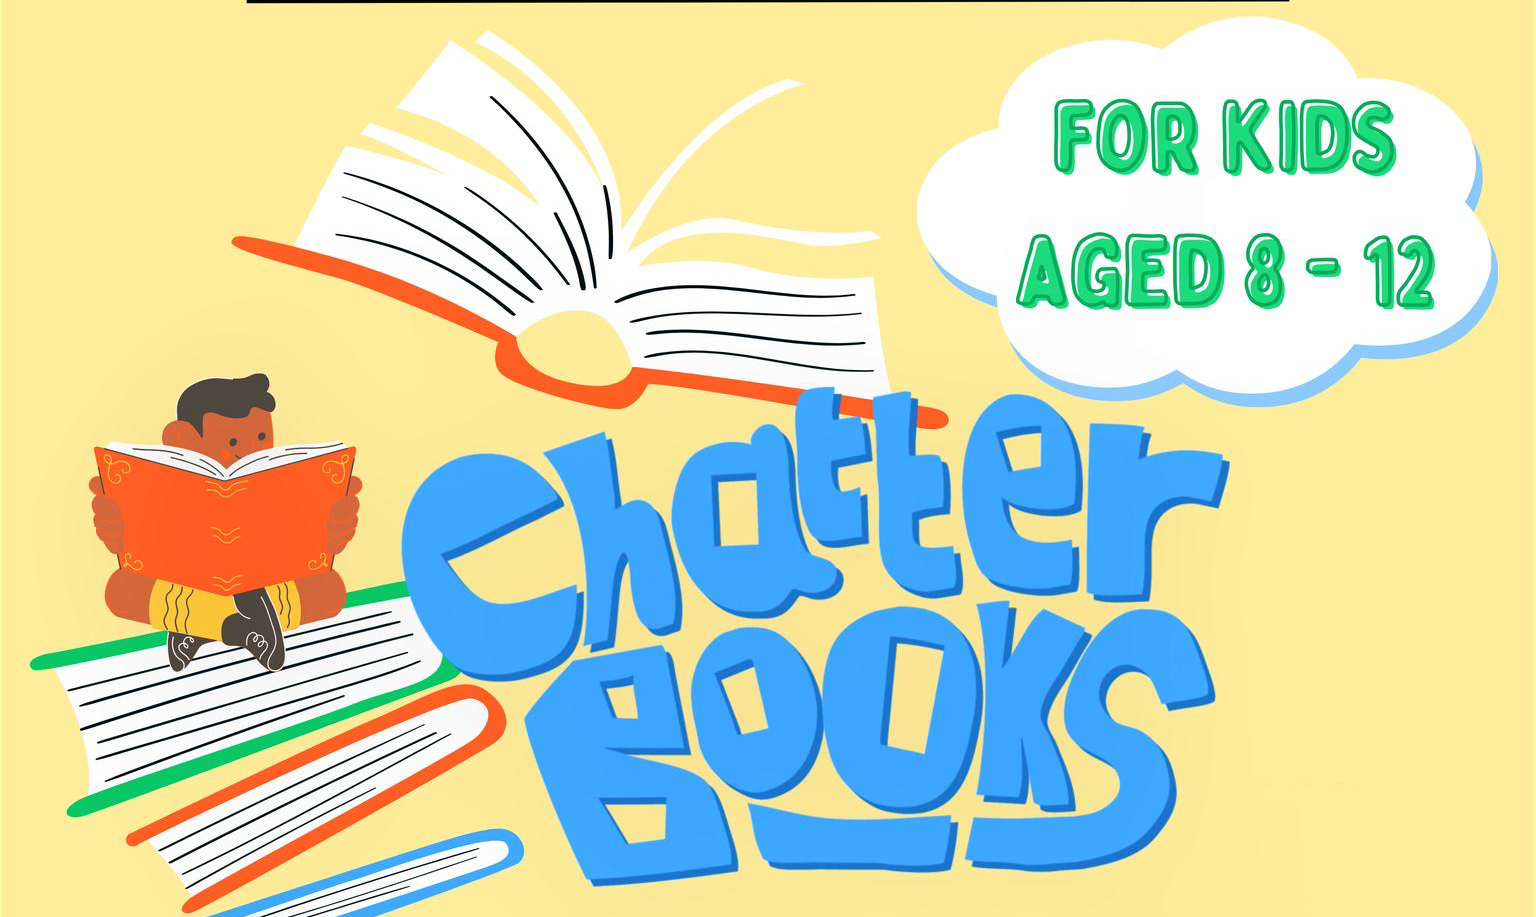 Chatterbooks Sighthill